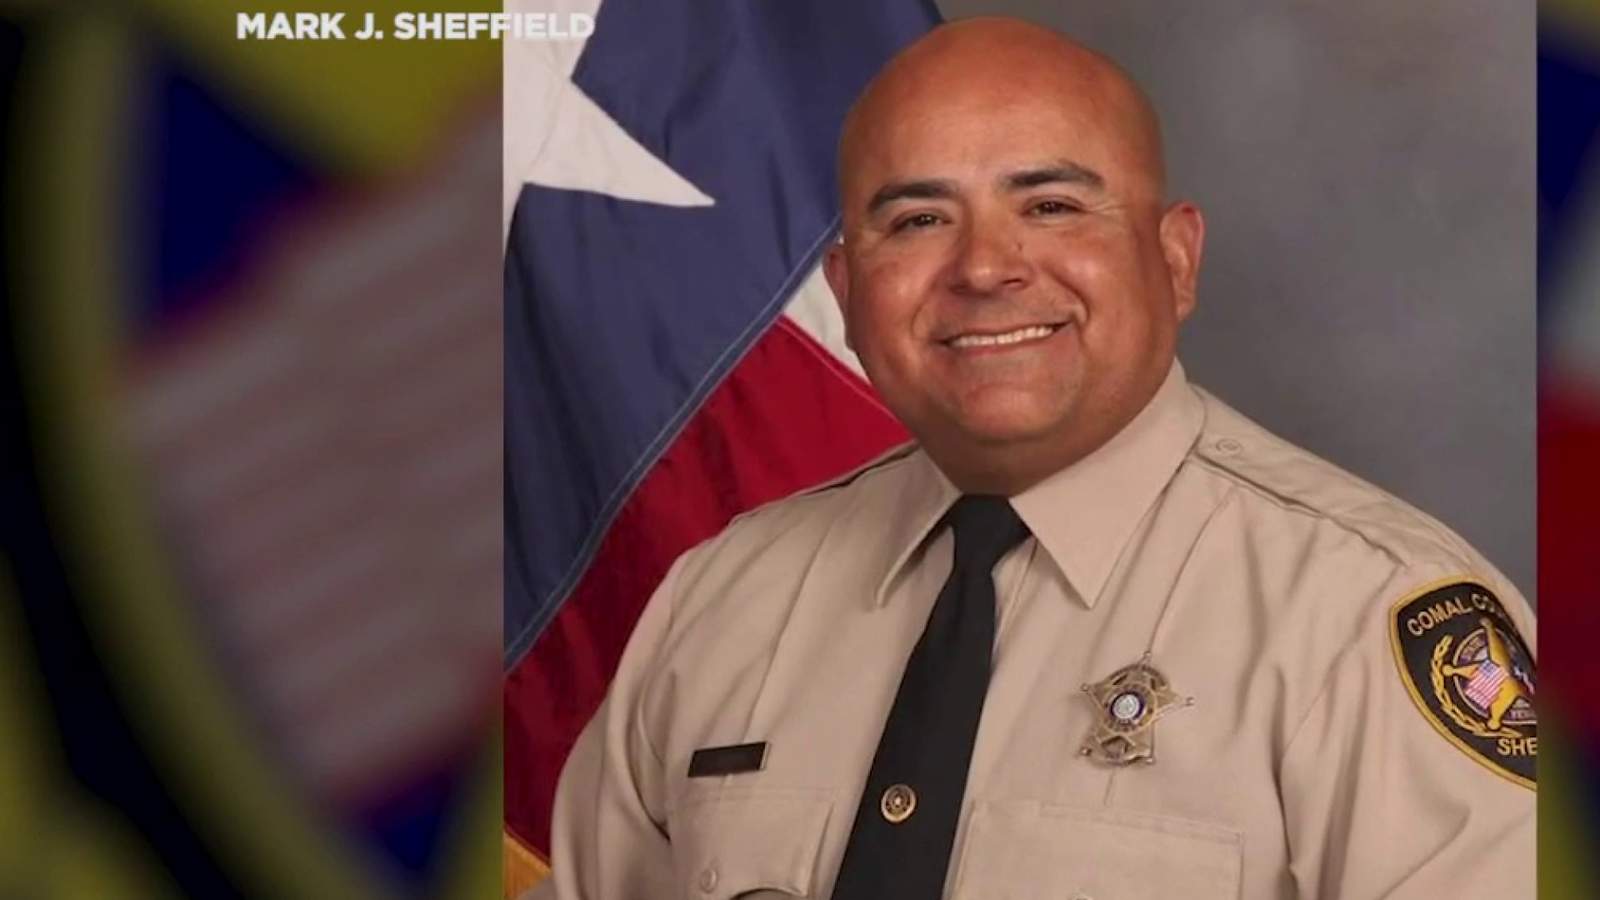 Local business raising money for Comal County Sheriffs deputy seriously injured after being shot